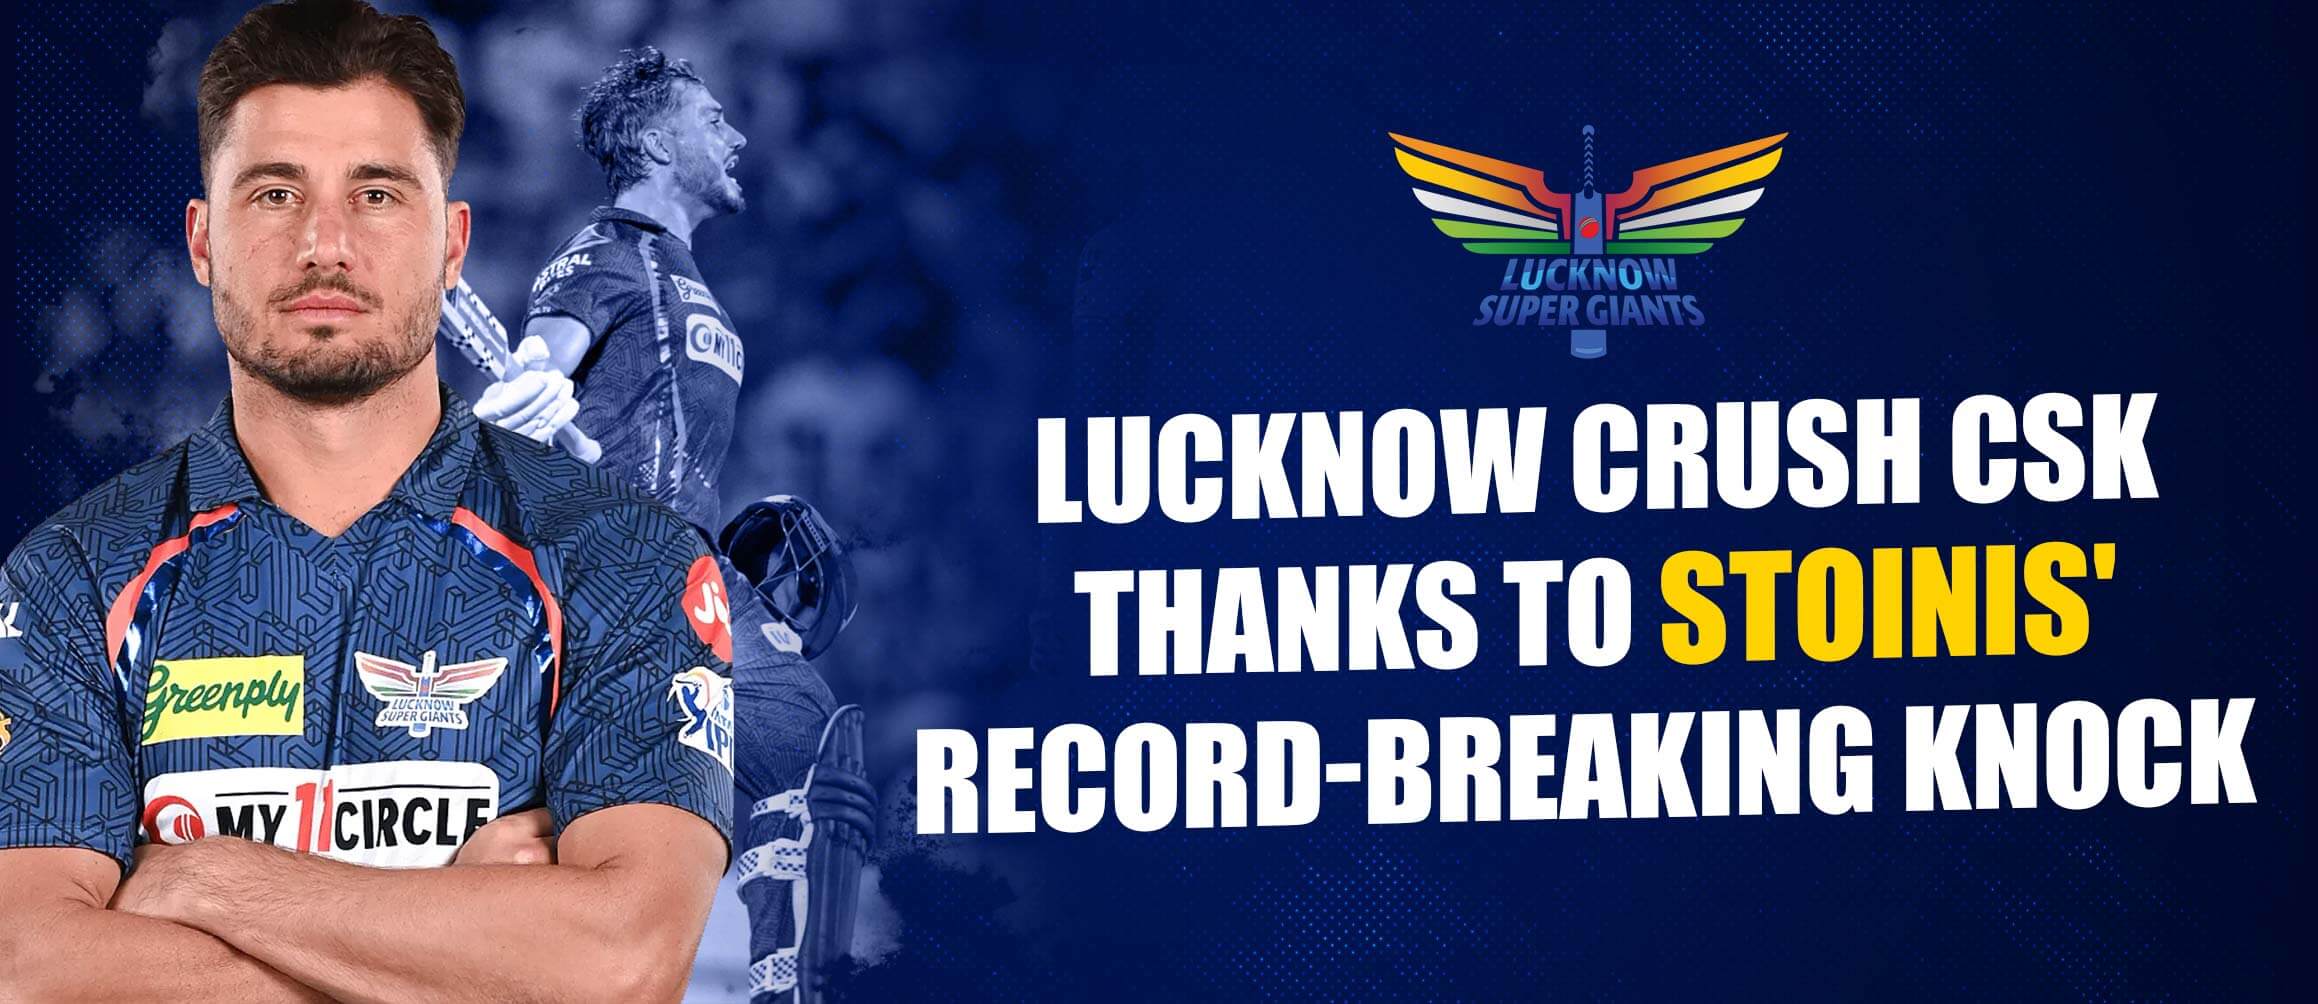 Lucknow Crush CSK Thanks to Stoinis’ Record-Breaking Knock